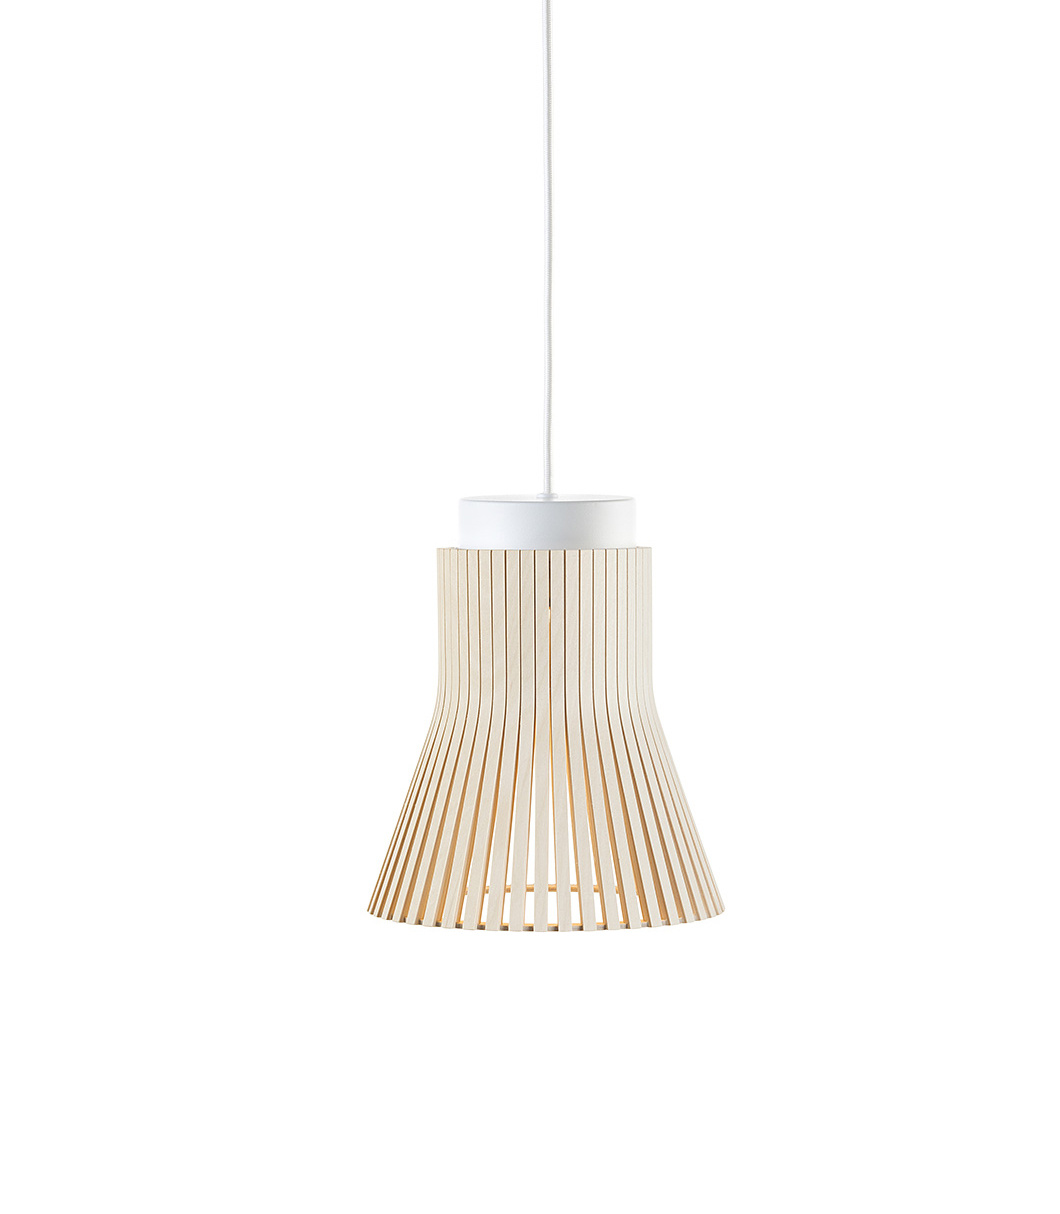 Petite 4600 pendant lamp is available in natural birch